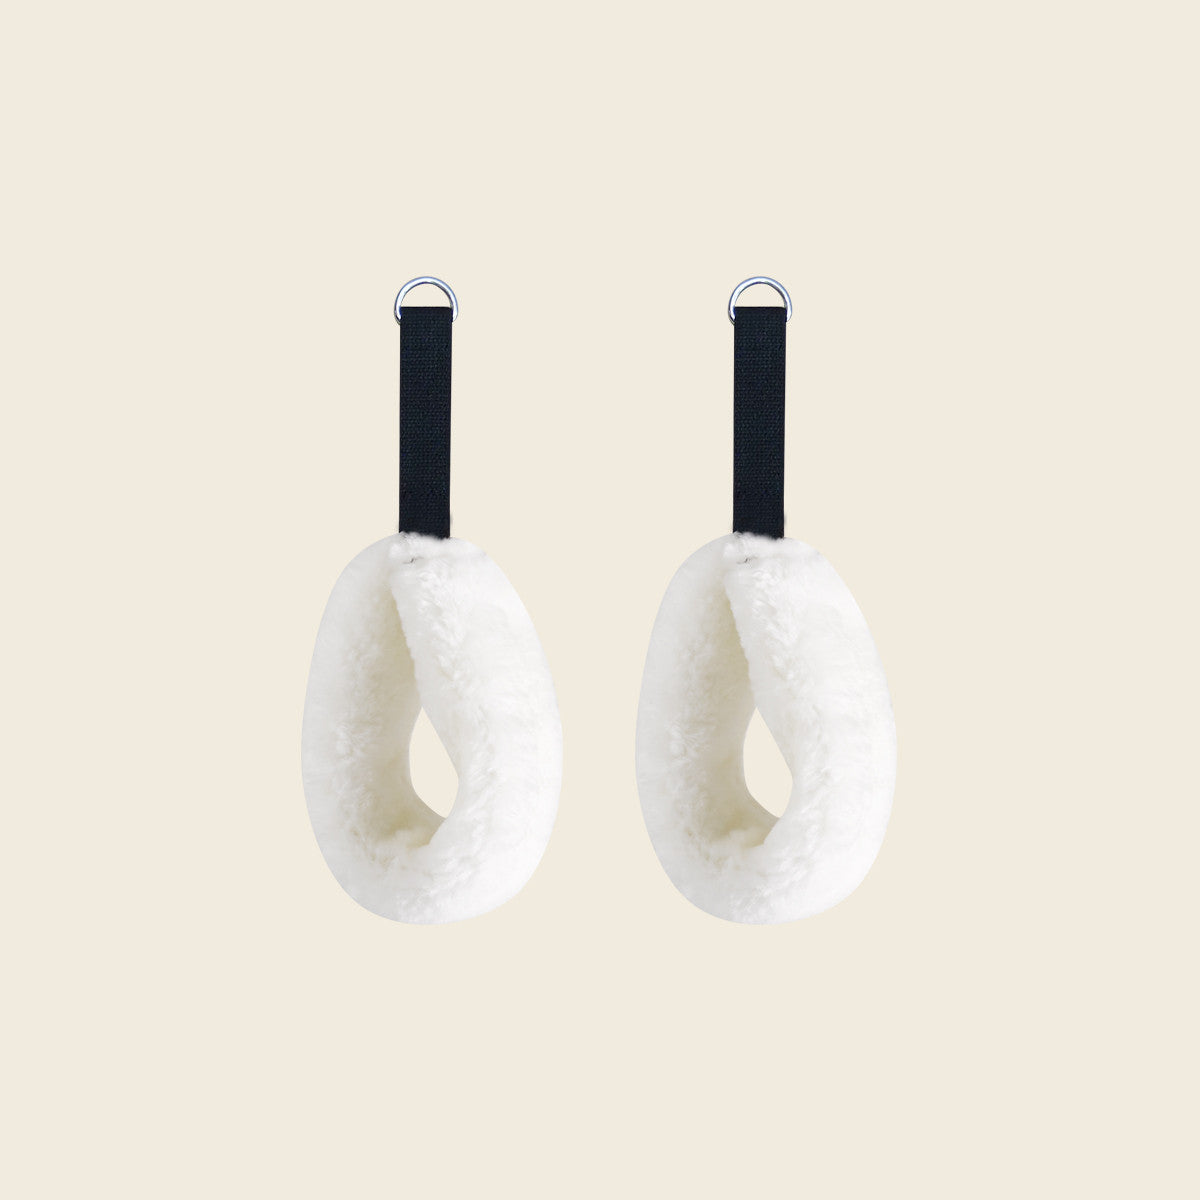 Sheepskin Loops With Canvas Straps For Guillotine Tower (Pair)